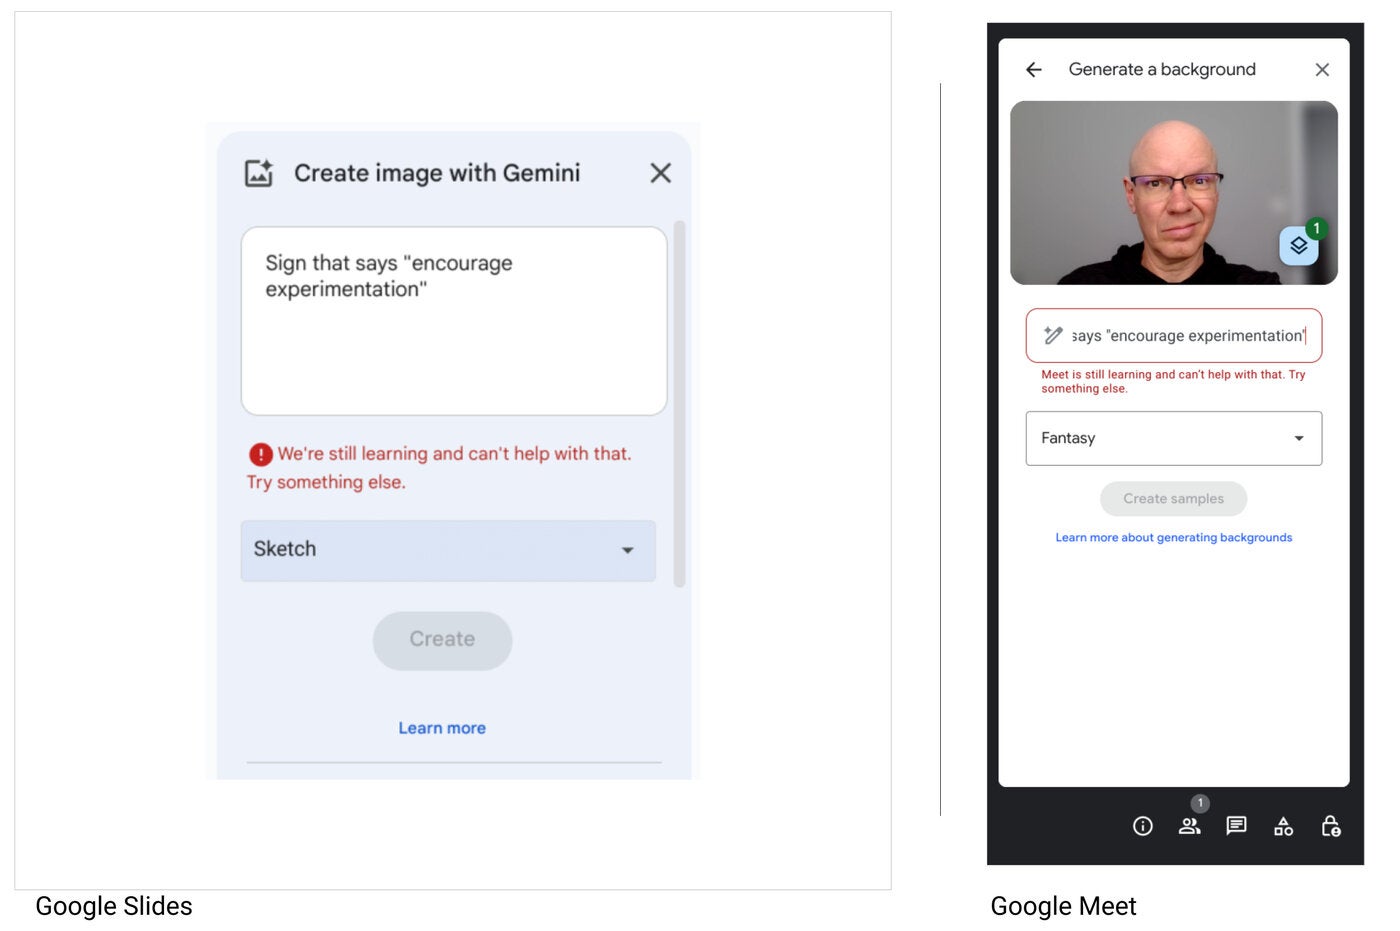 As of March 2024, Gemini refuses to generate signs with text in both Google Slides (left) and Google Meet (right).